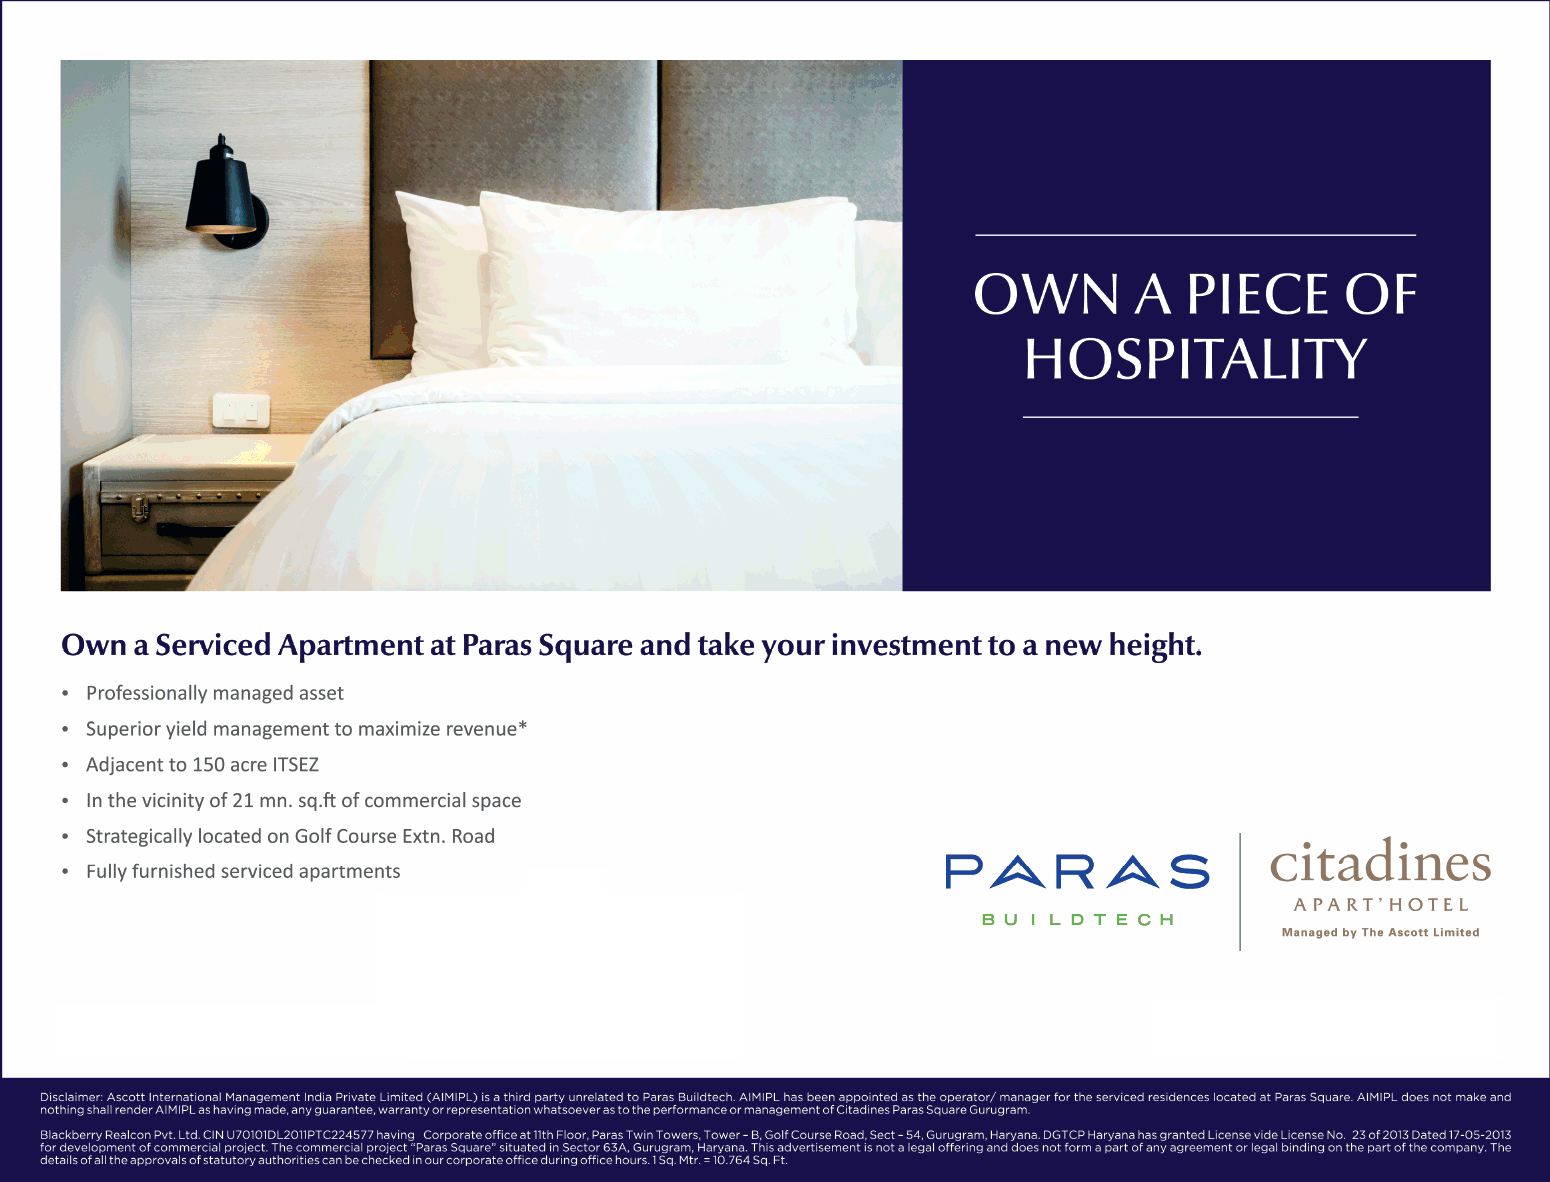 Own a service apartments at Paras Sqaure & take your investment to a new height in Gurgaon Update